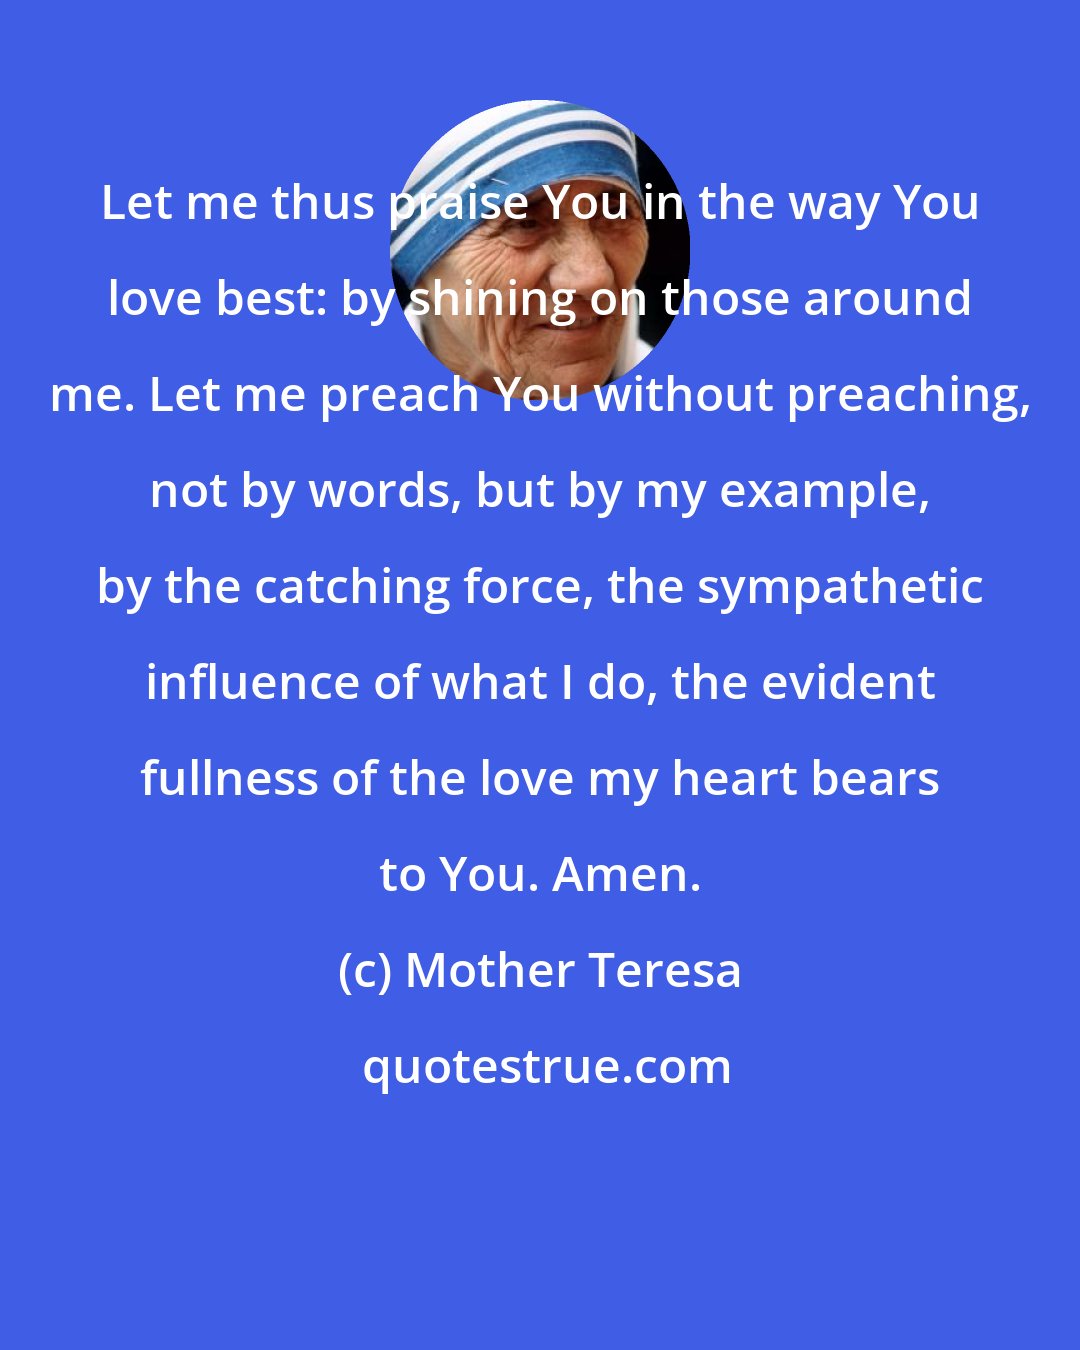 Mother Teresa: Let me thus praise You in the way You love best: by shining on those around me. Let me preach You without preaching, not by words, but by my example, by the catching force, the sympathetic influence of what I do, the evident fullness of the love my heart bears to You. Amen.